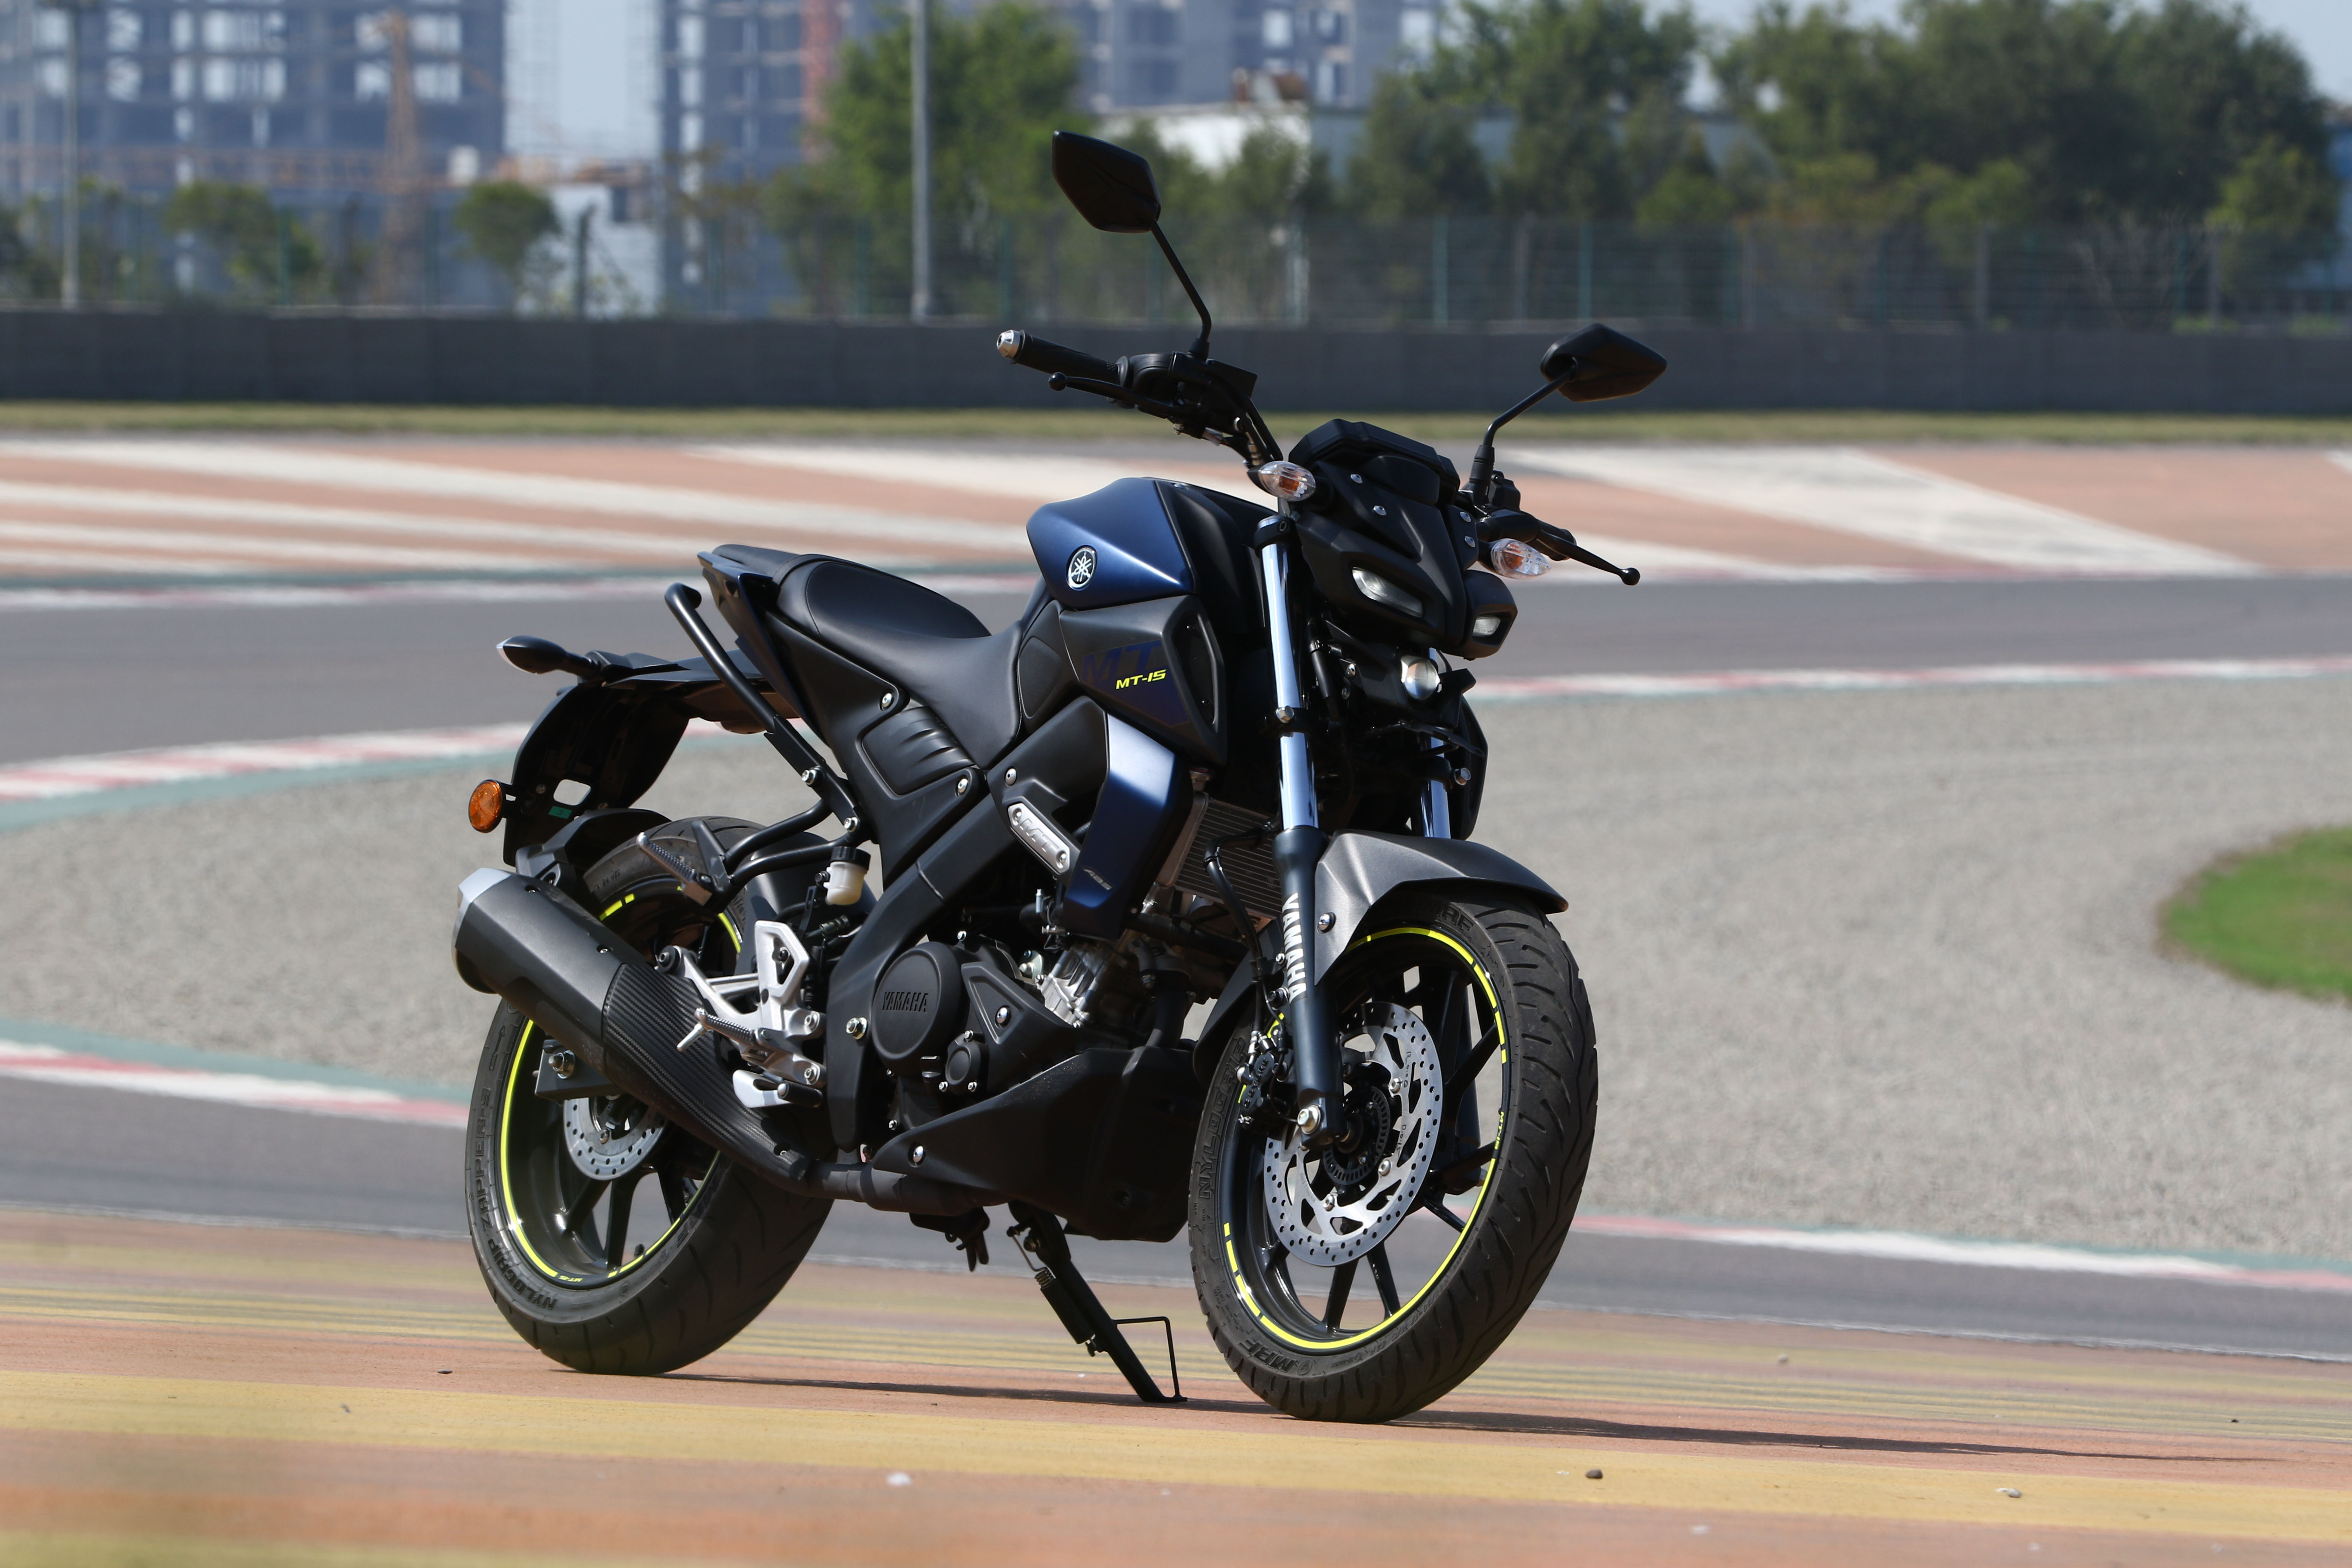 Yamaha MT 15 Price In India, Mileage, Image, Colours, Reviews